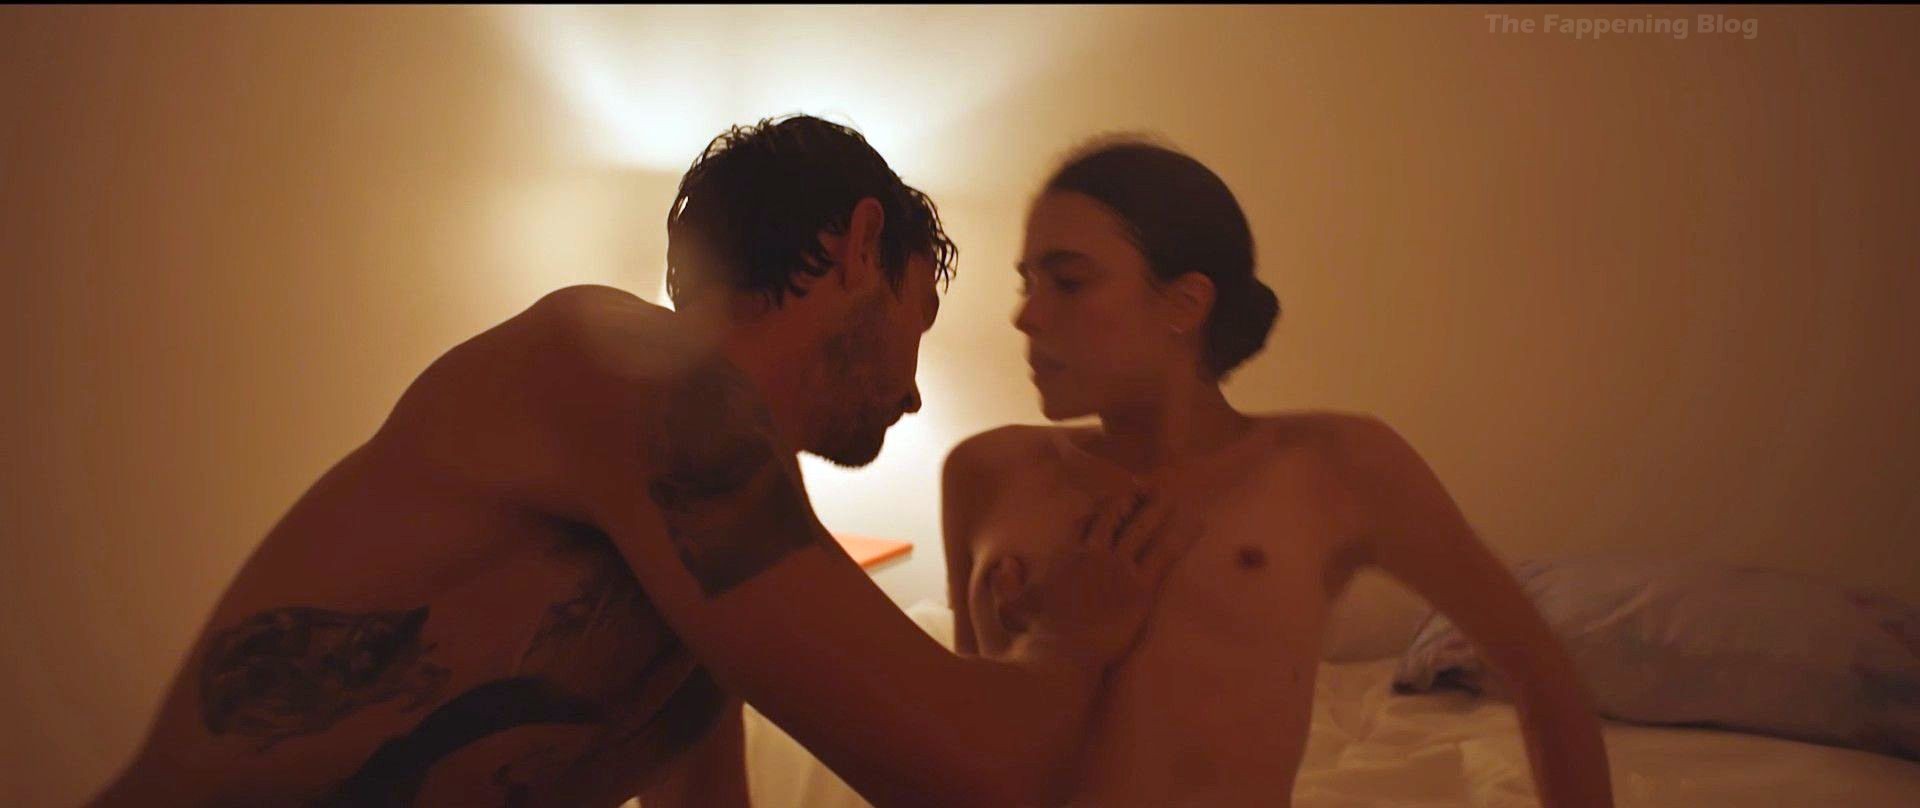 Margaret Qualley Nude - Love Me Like You Hate Me (24 Pics + Video)